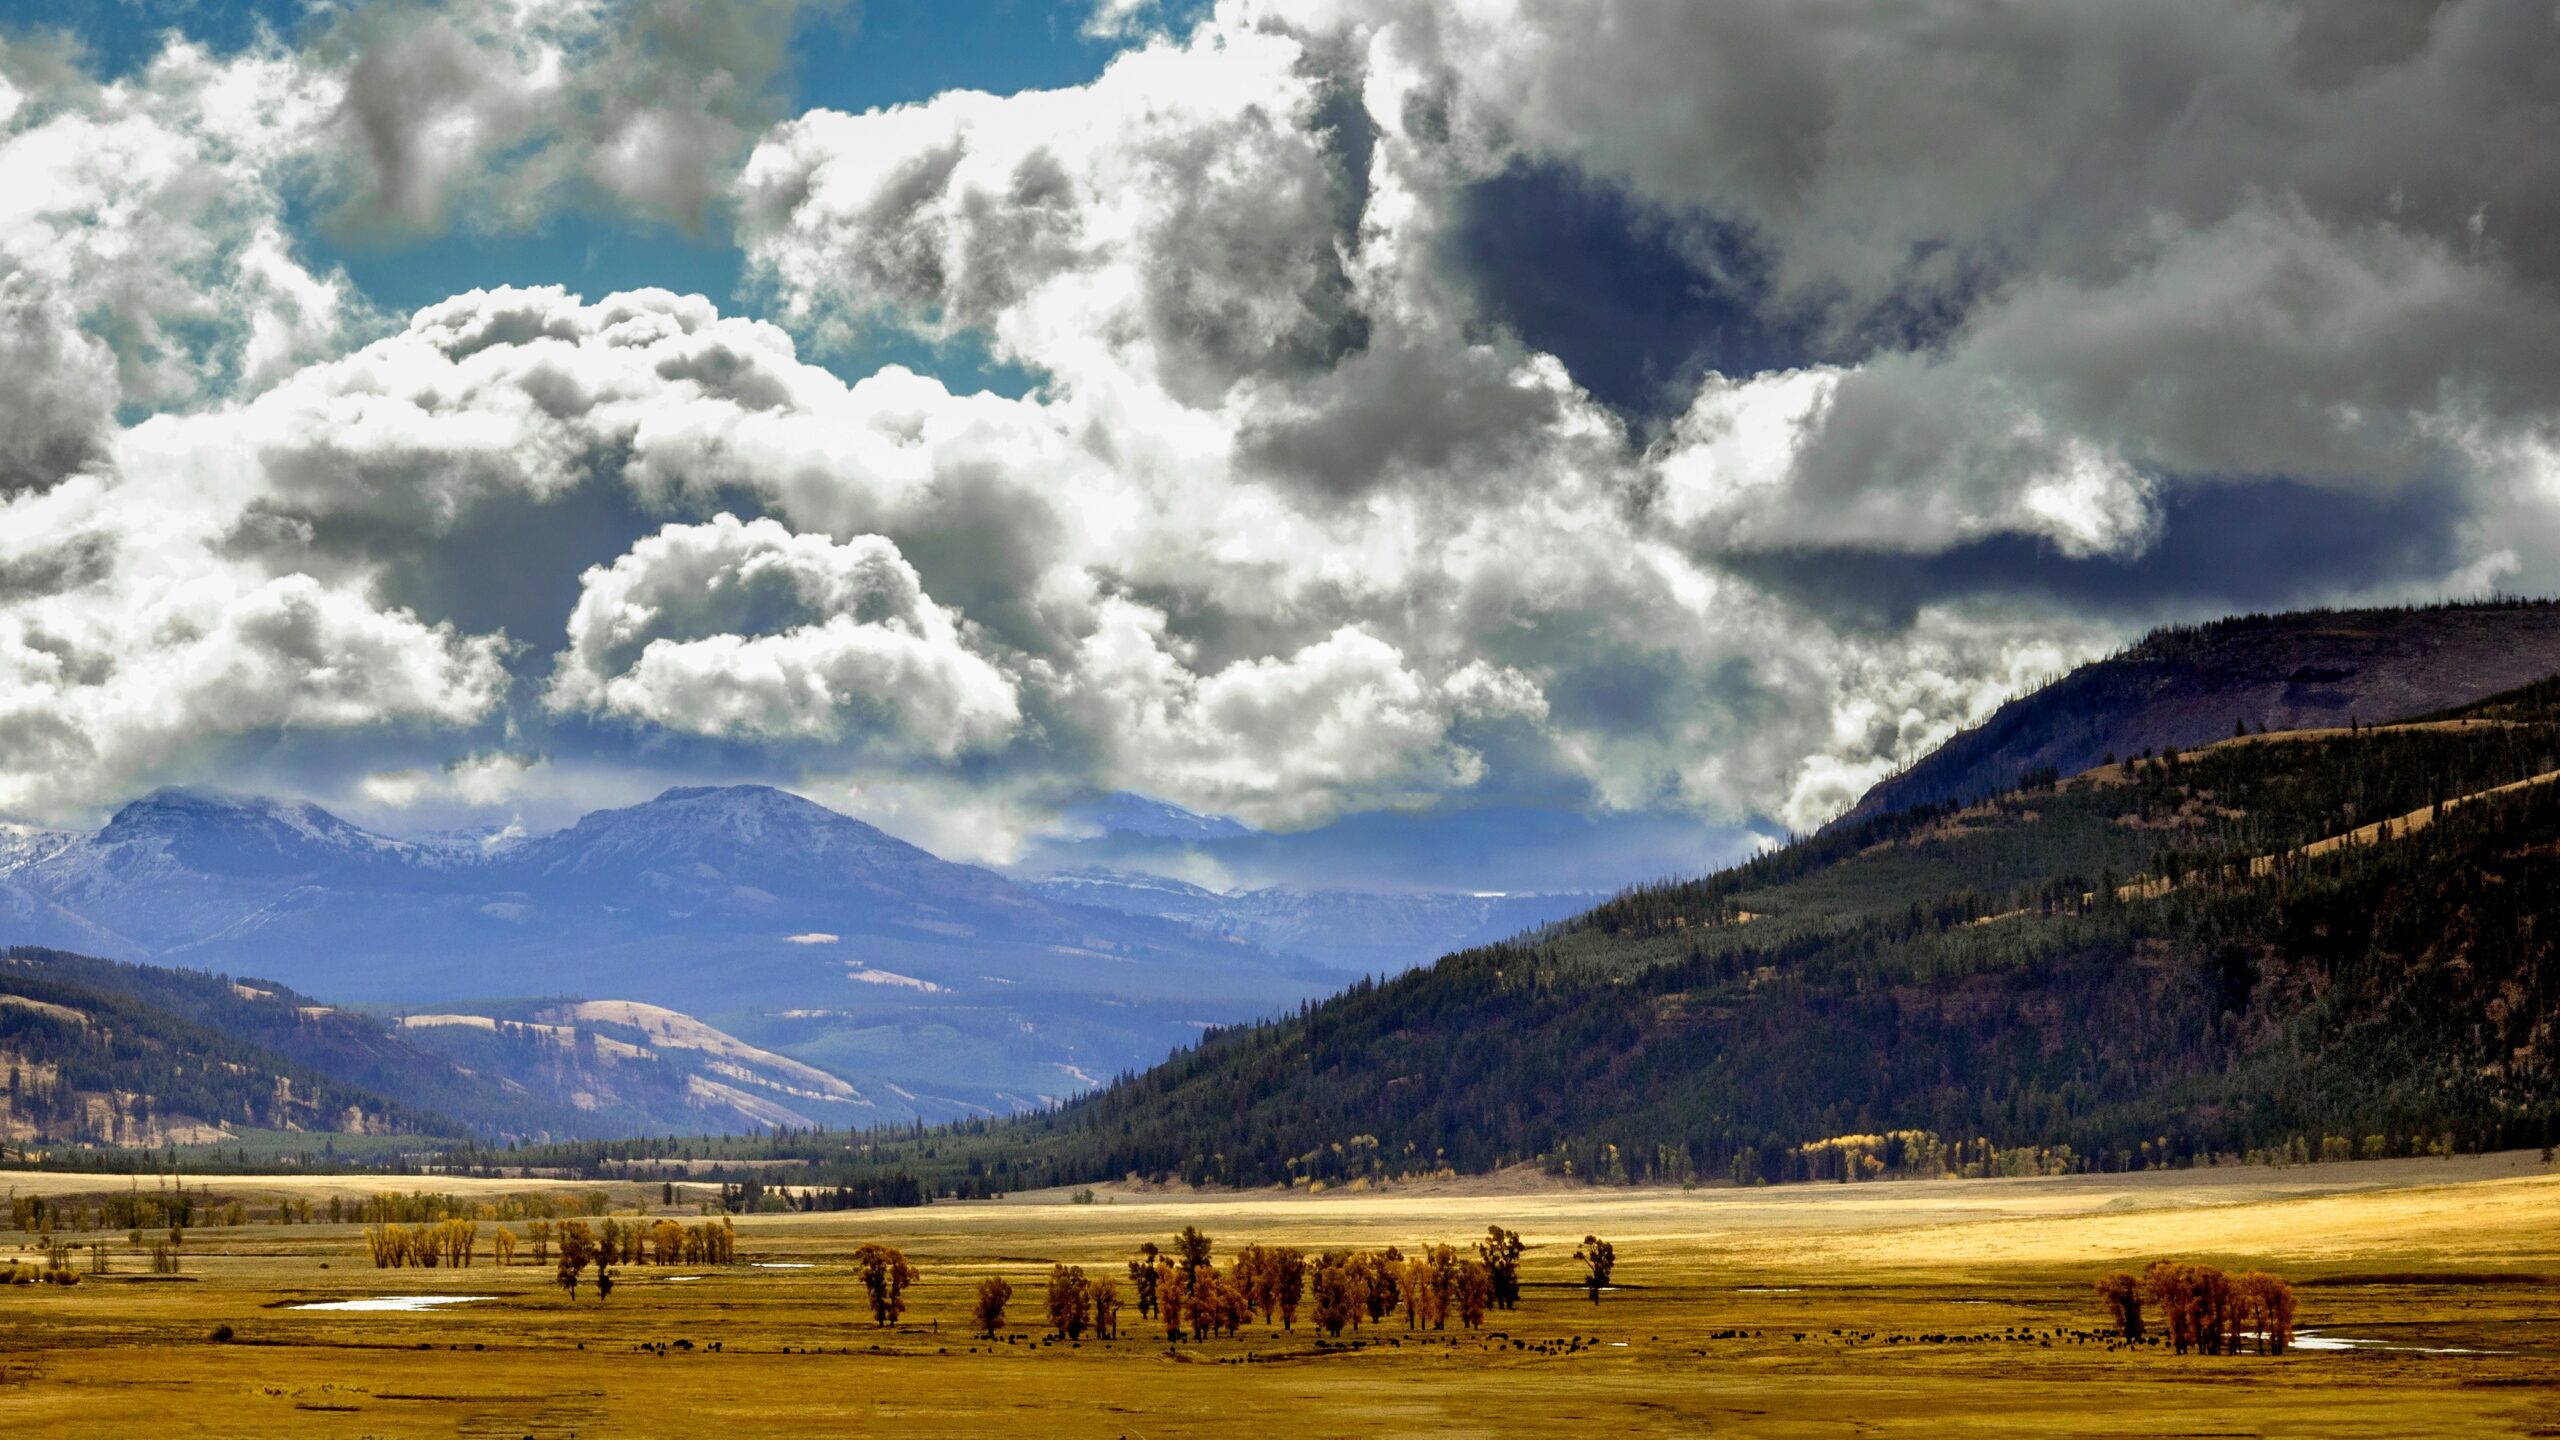 Pictured: Yellowstone National Park on a cloudy day with grazing cattle